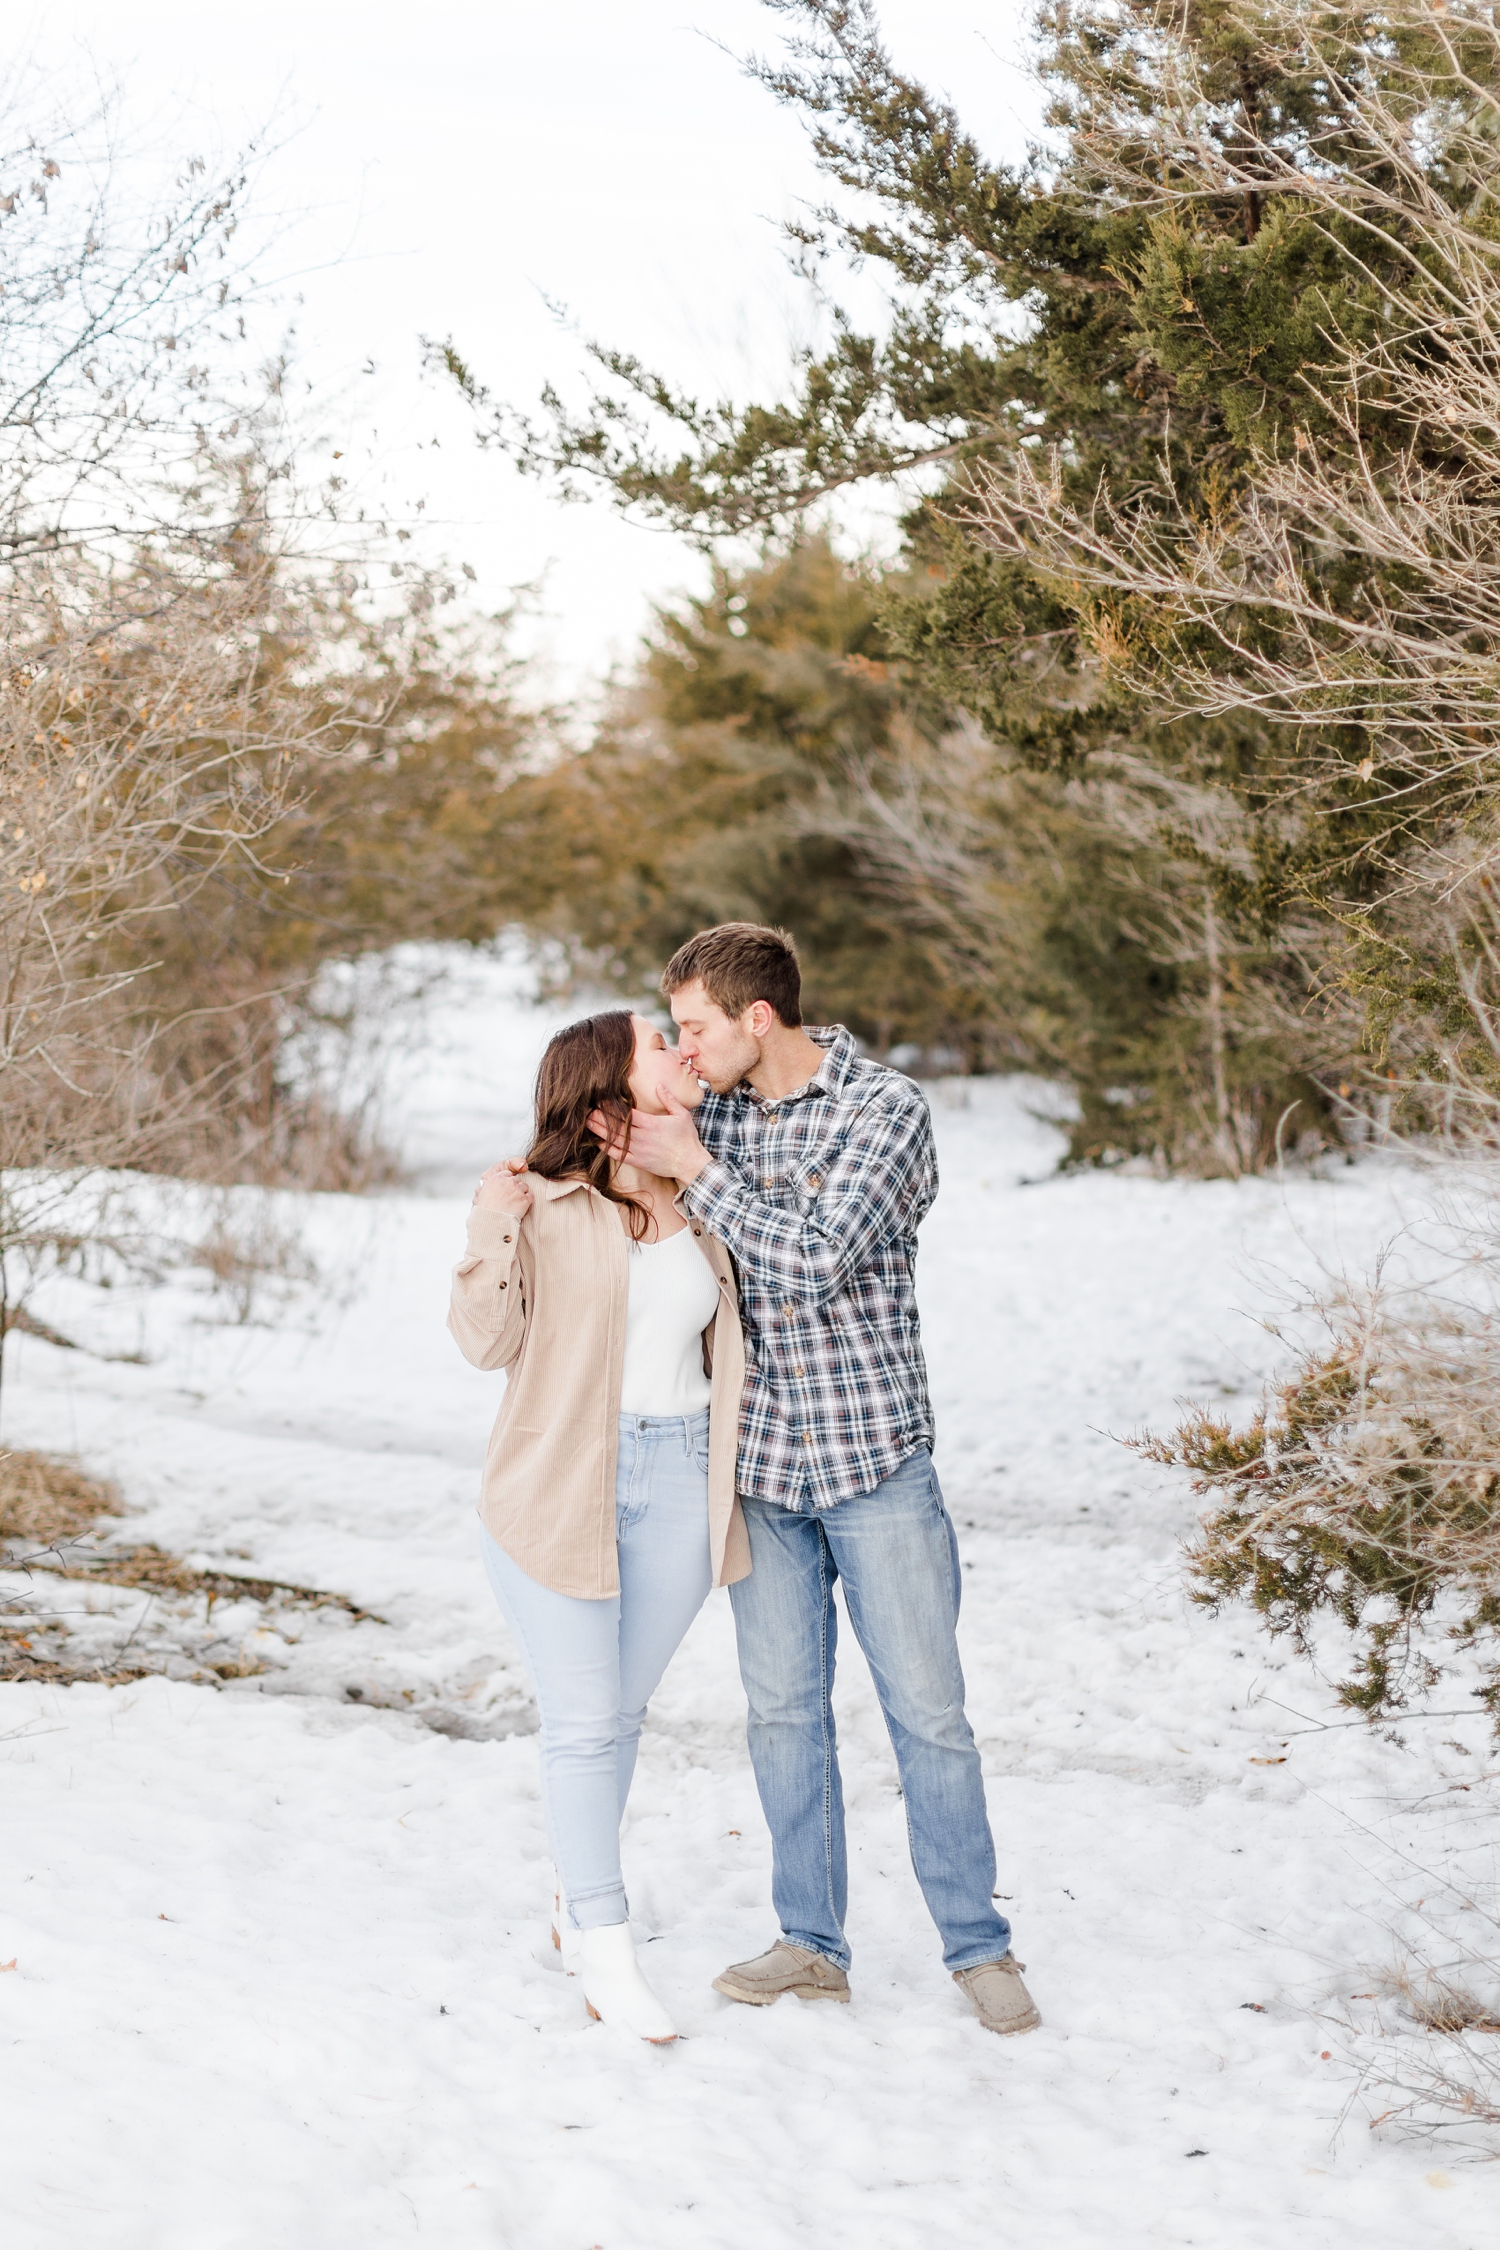 Grant gently pulls his bride to be, Alyssa, in for a kiss at Water's Edge Nature Center | Iowa Wedding Photographer | CB Studio